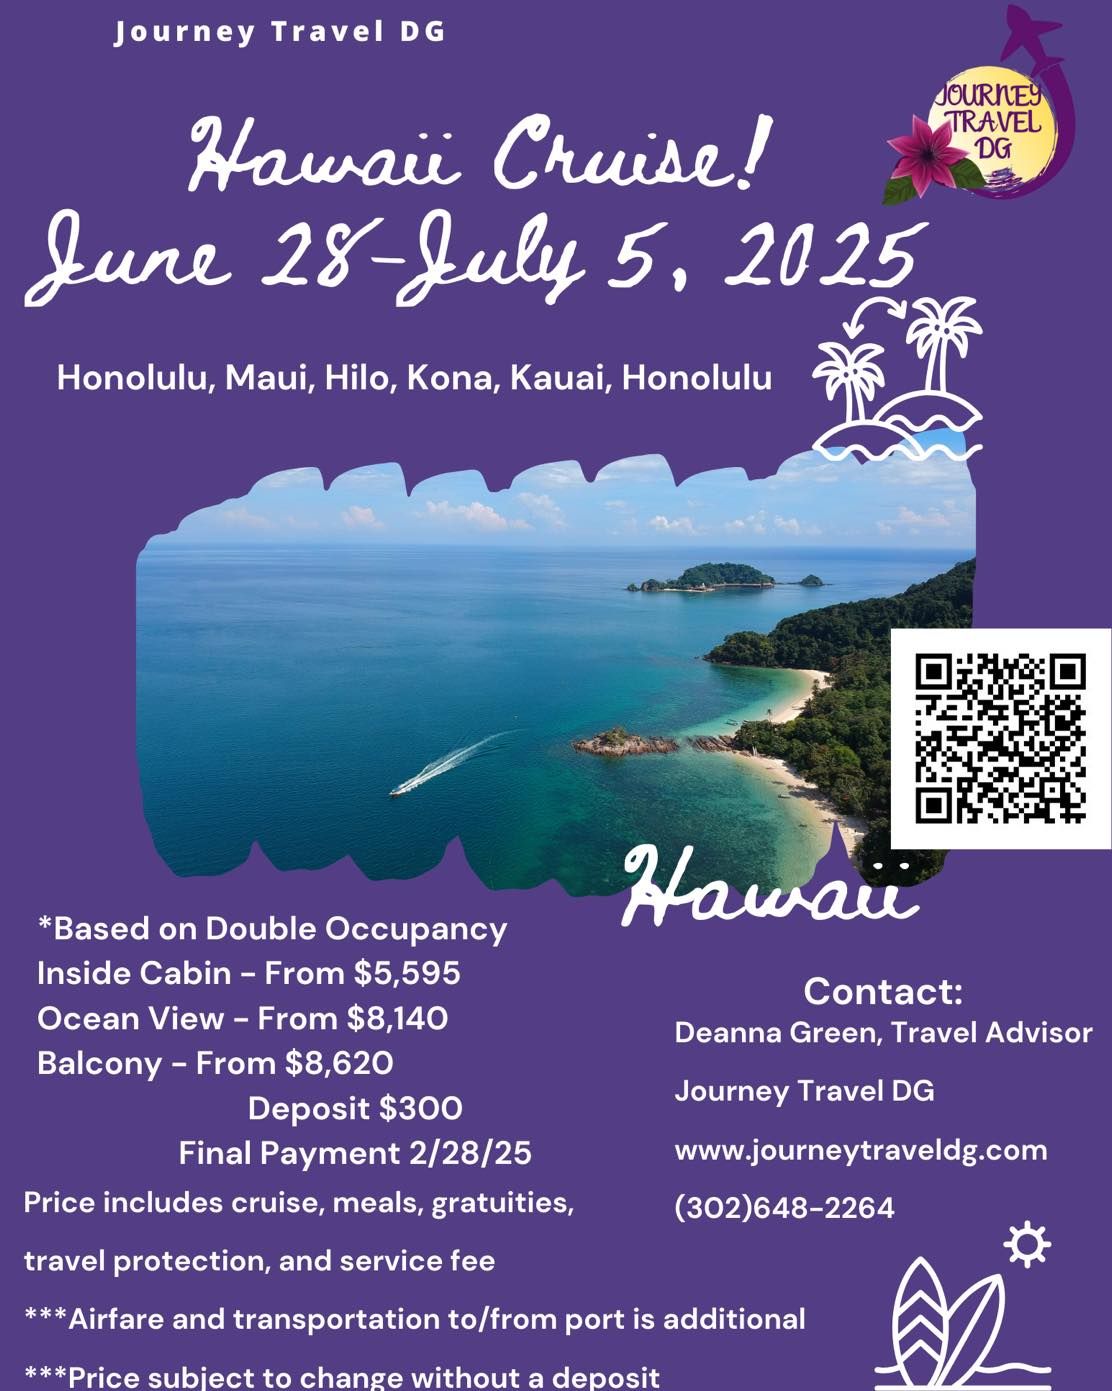 Pack your bags & Cruise with Journey Travel DG to Hawaii in 2025